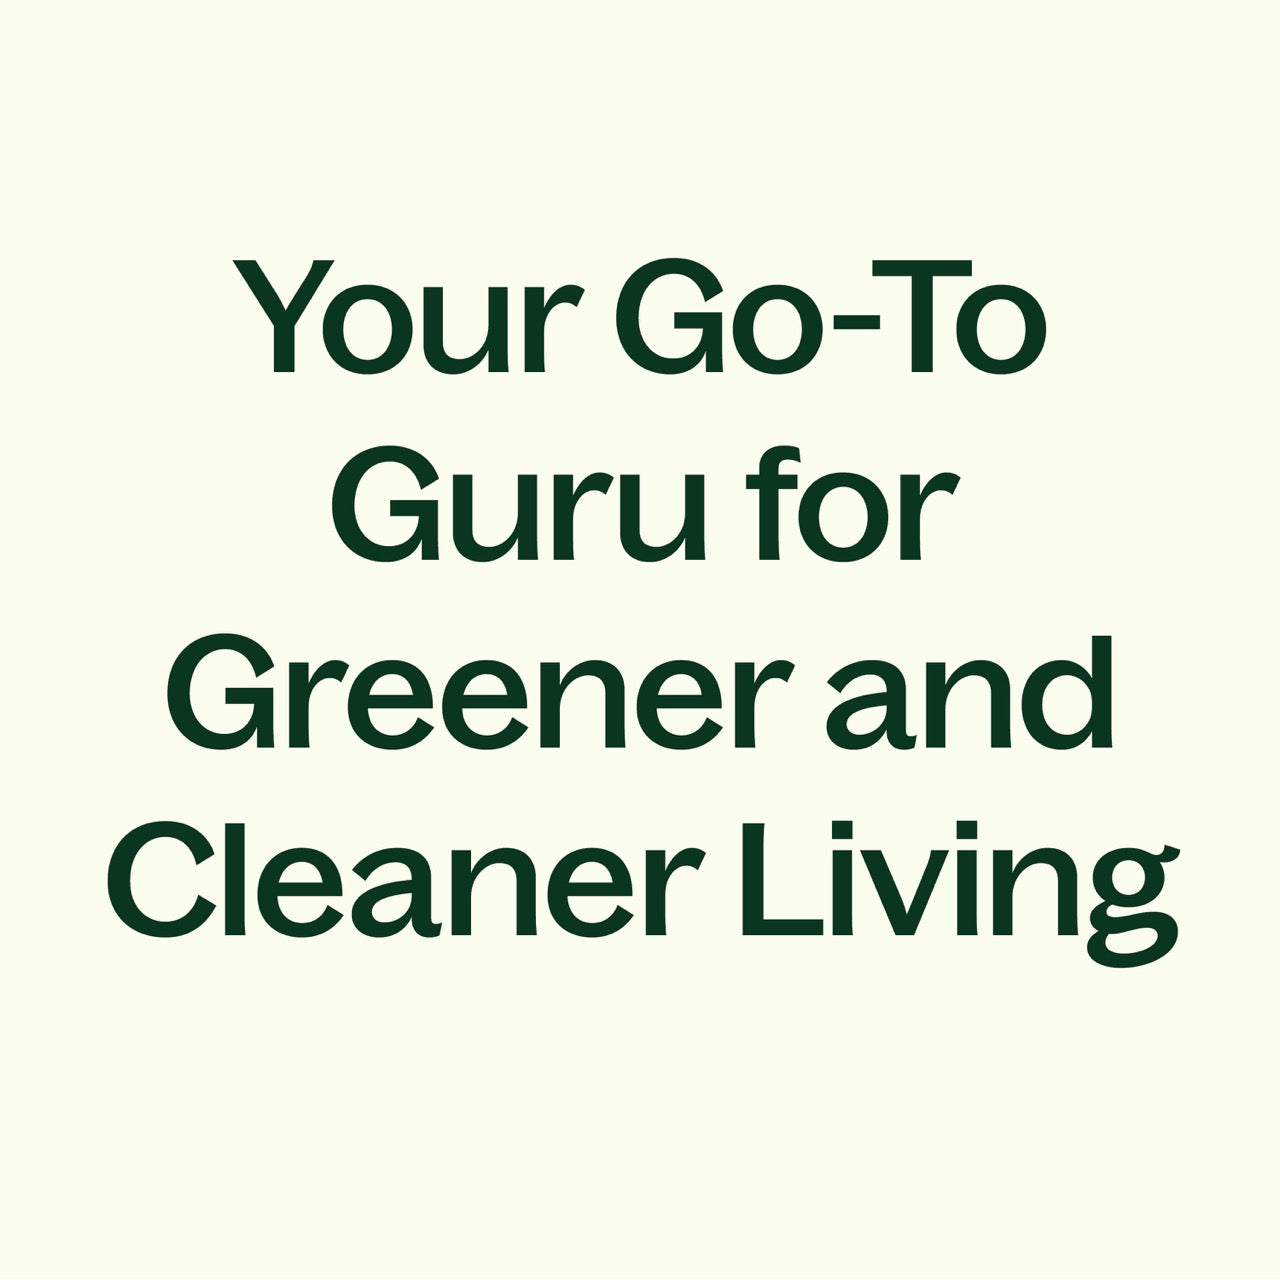 Your go-to guru for greener and cleaner living